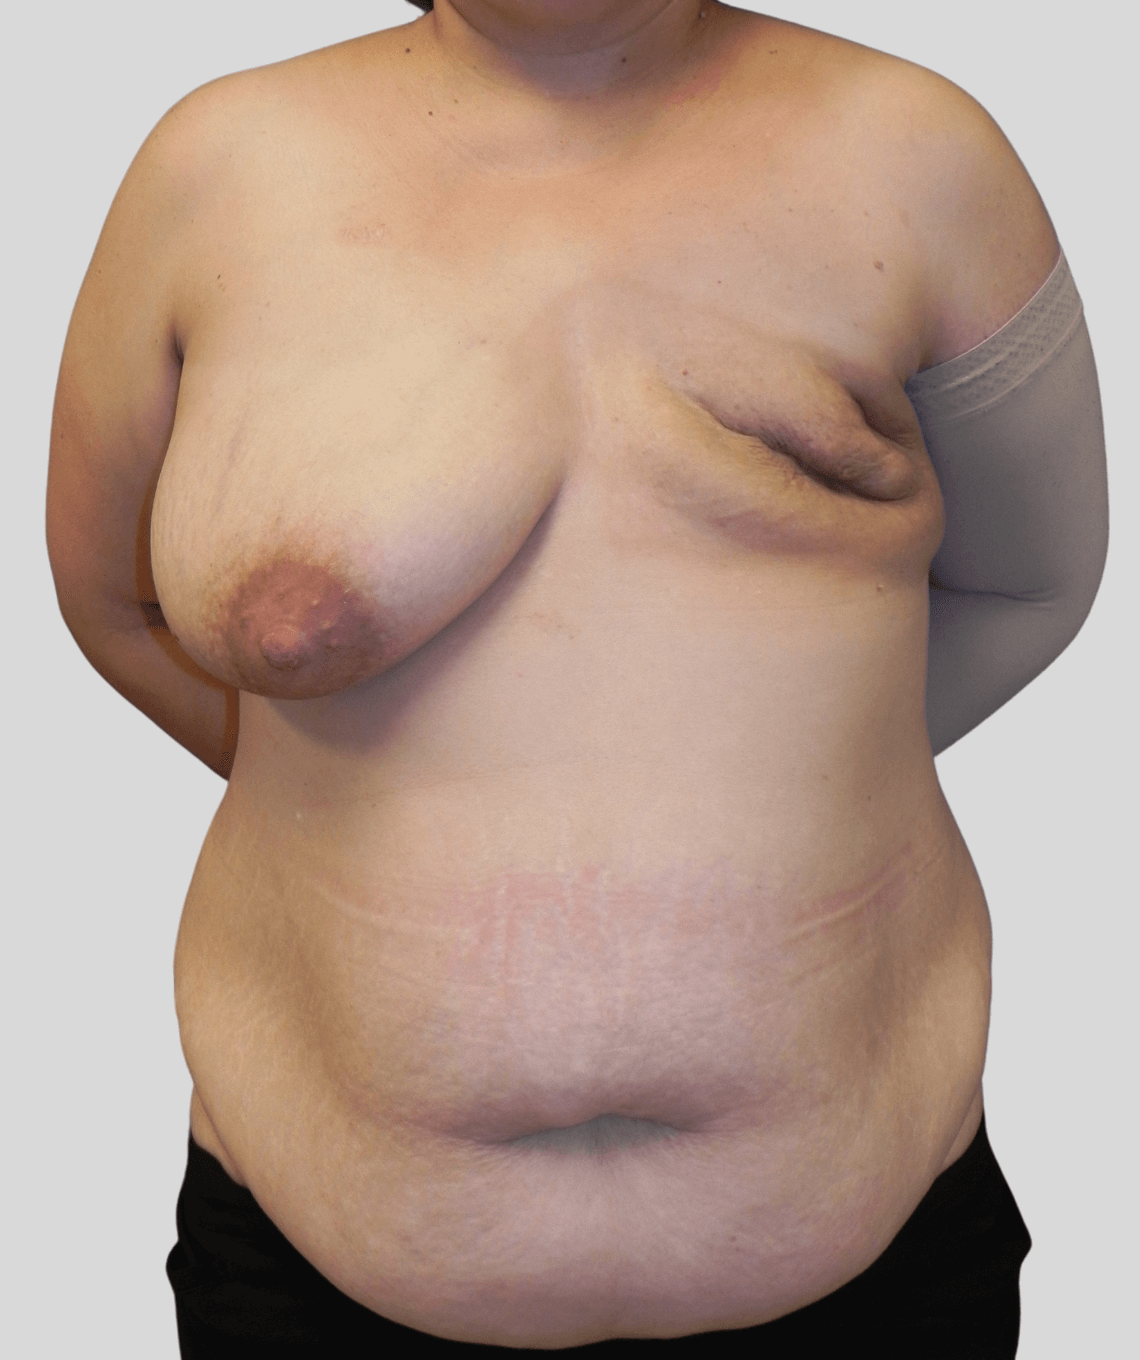 diep flap- before and after photos - before - prma plastic surgery - case 14